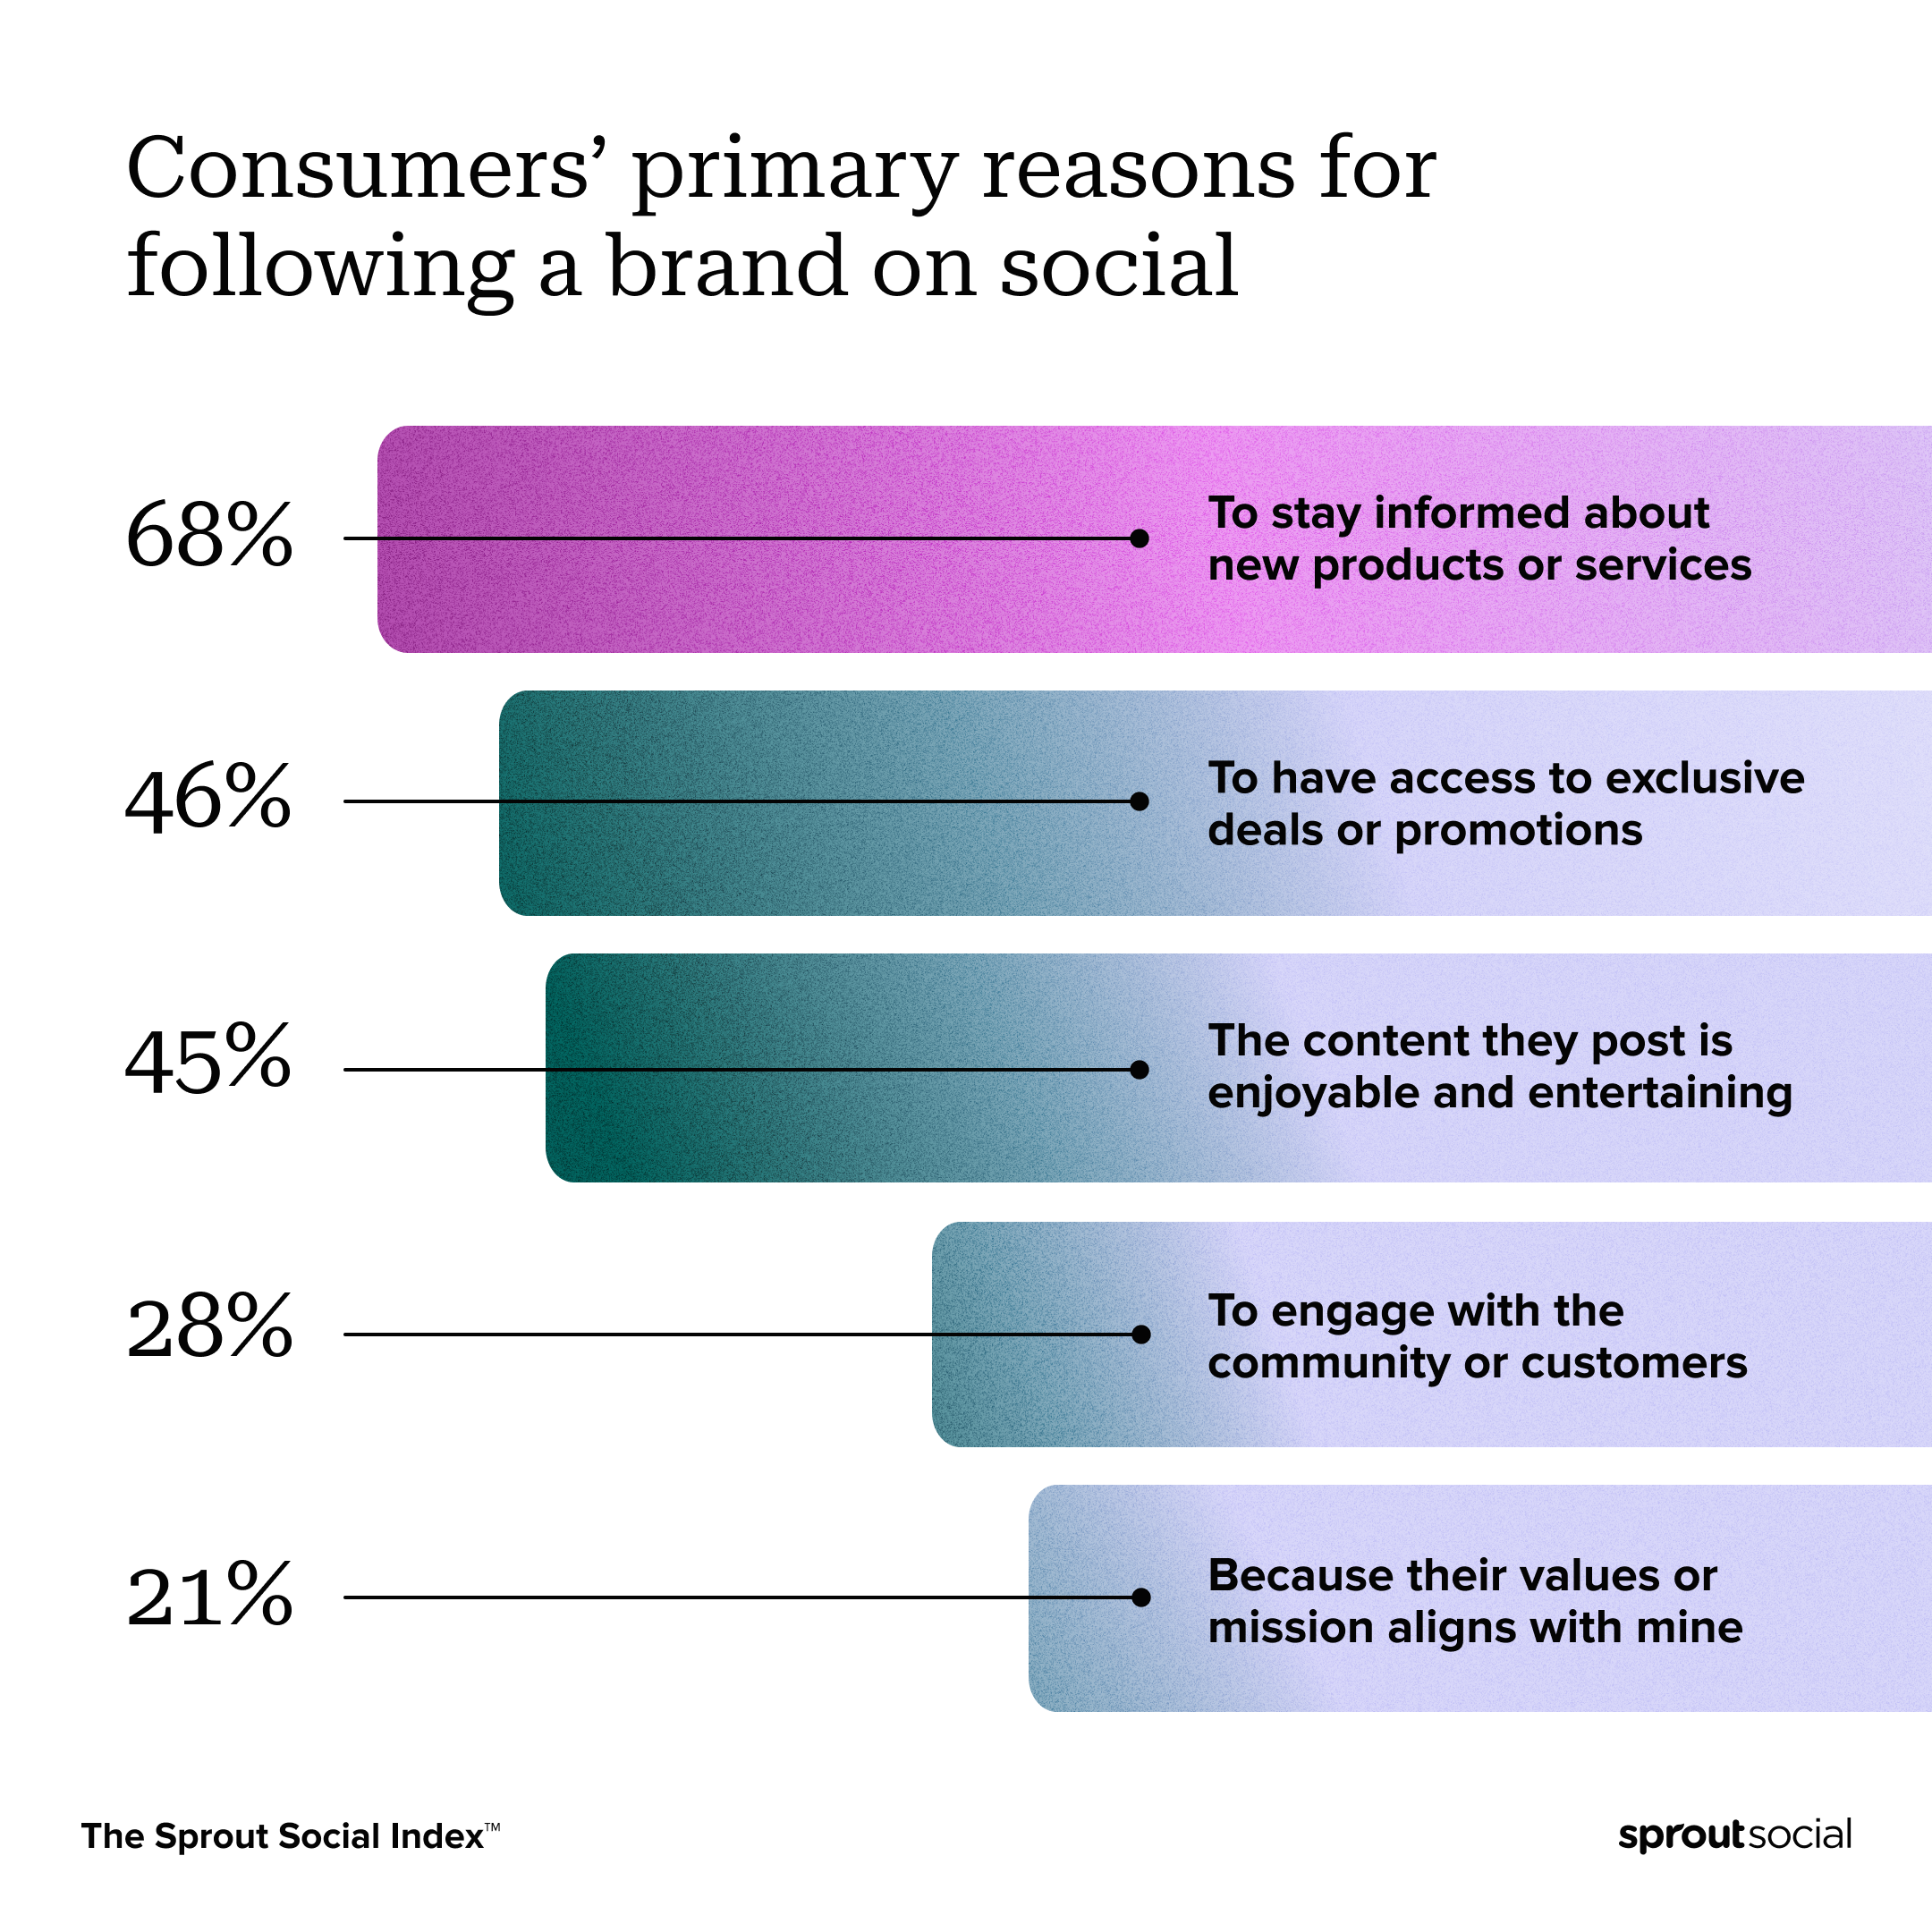 Data visualization from The Sprout Social Index™, showing the primary reason consumers follow brands on social is to stay informed about new products or services (68%). After product discovery,  the top reasons include: having access to exclusive deals or promotions (46%), the content post is enjoyable and entertaining (45%), to engage with the community or customers (28%) and because their values or mission align (21%).